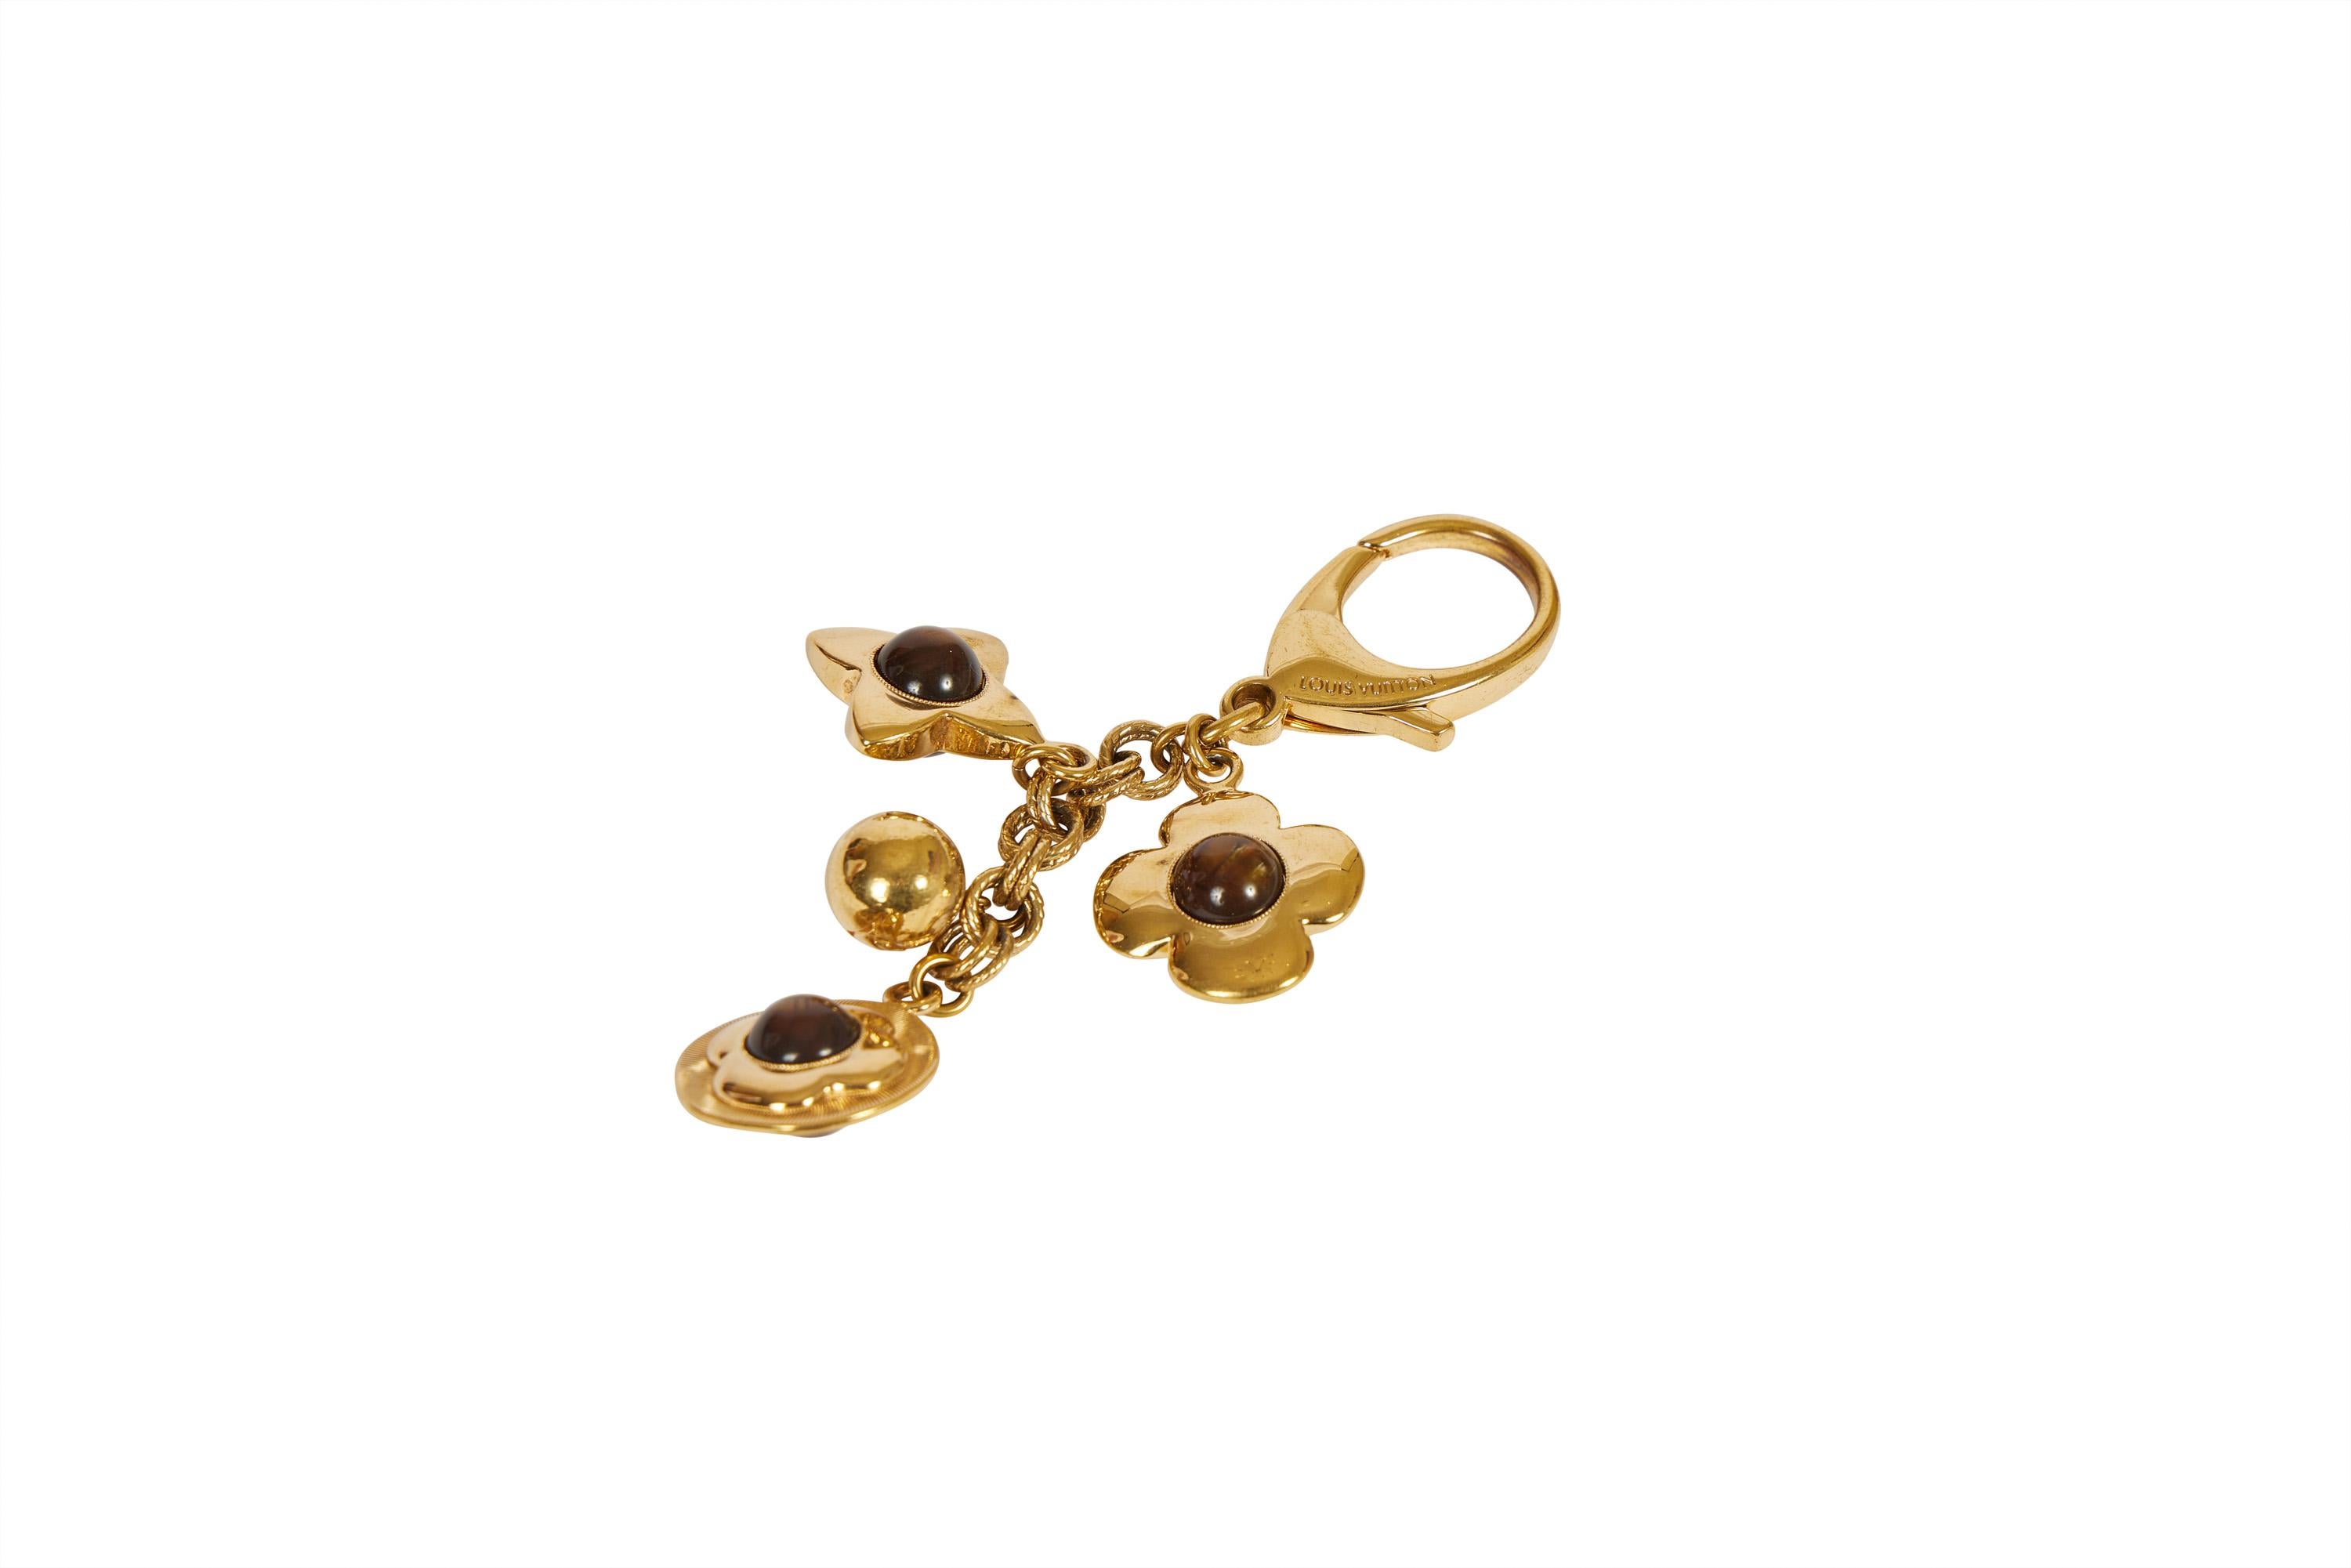 Louis Vuitton authentic bag charm /keychain with brown monogram symbols and gold tone metal. Comes with original pouch or box.
